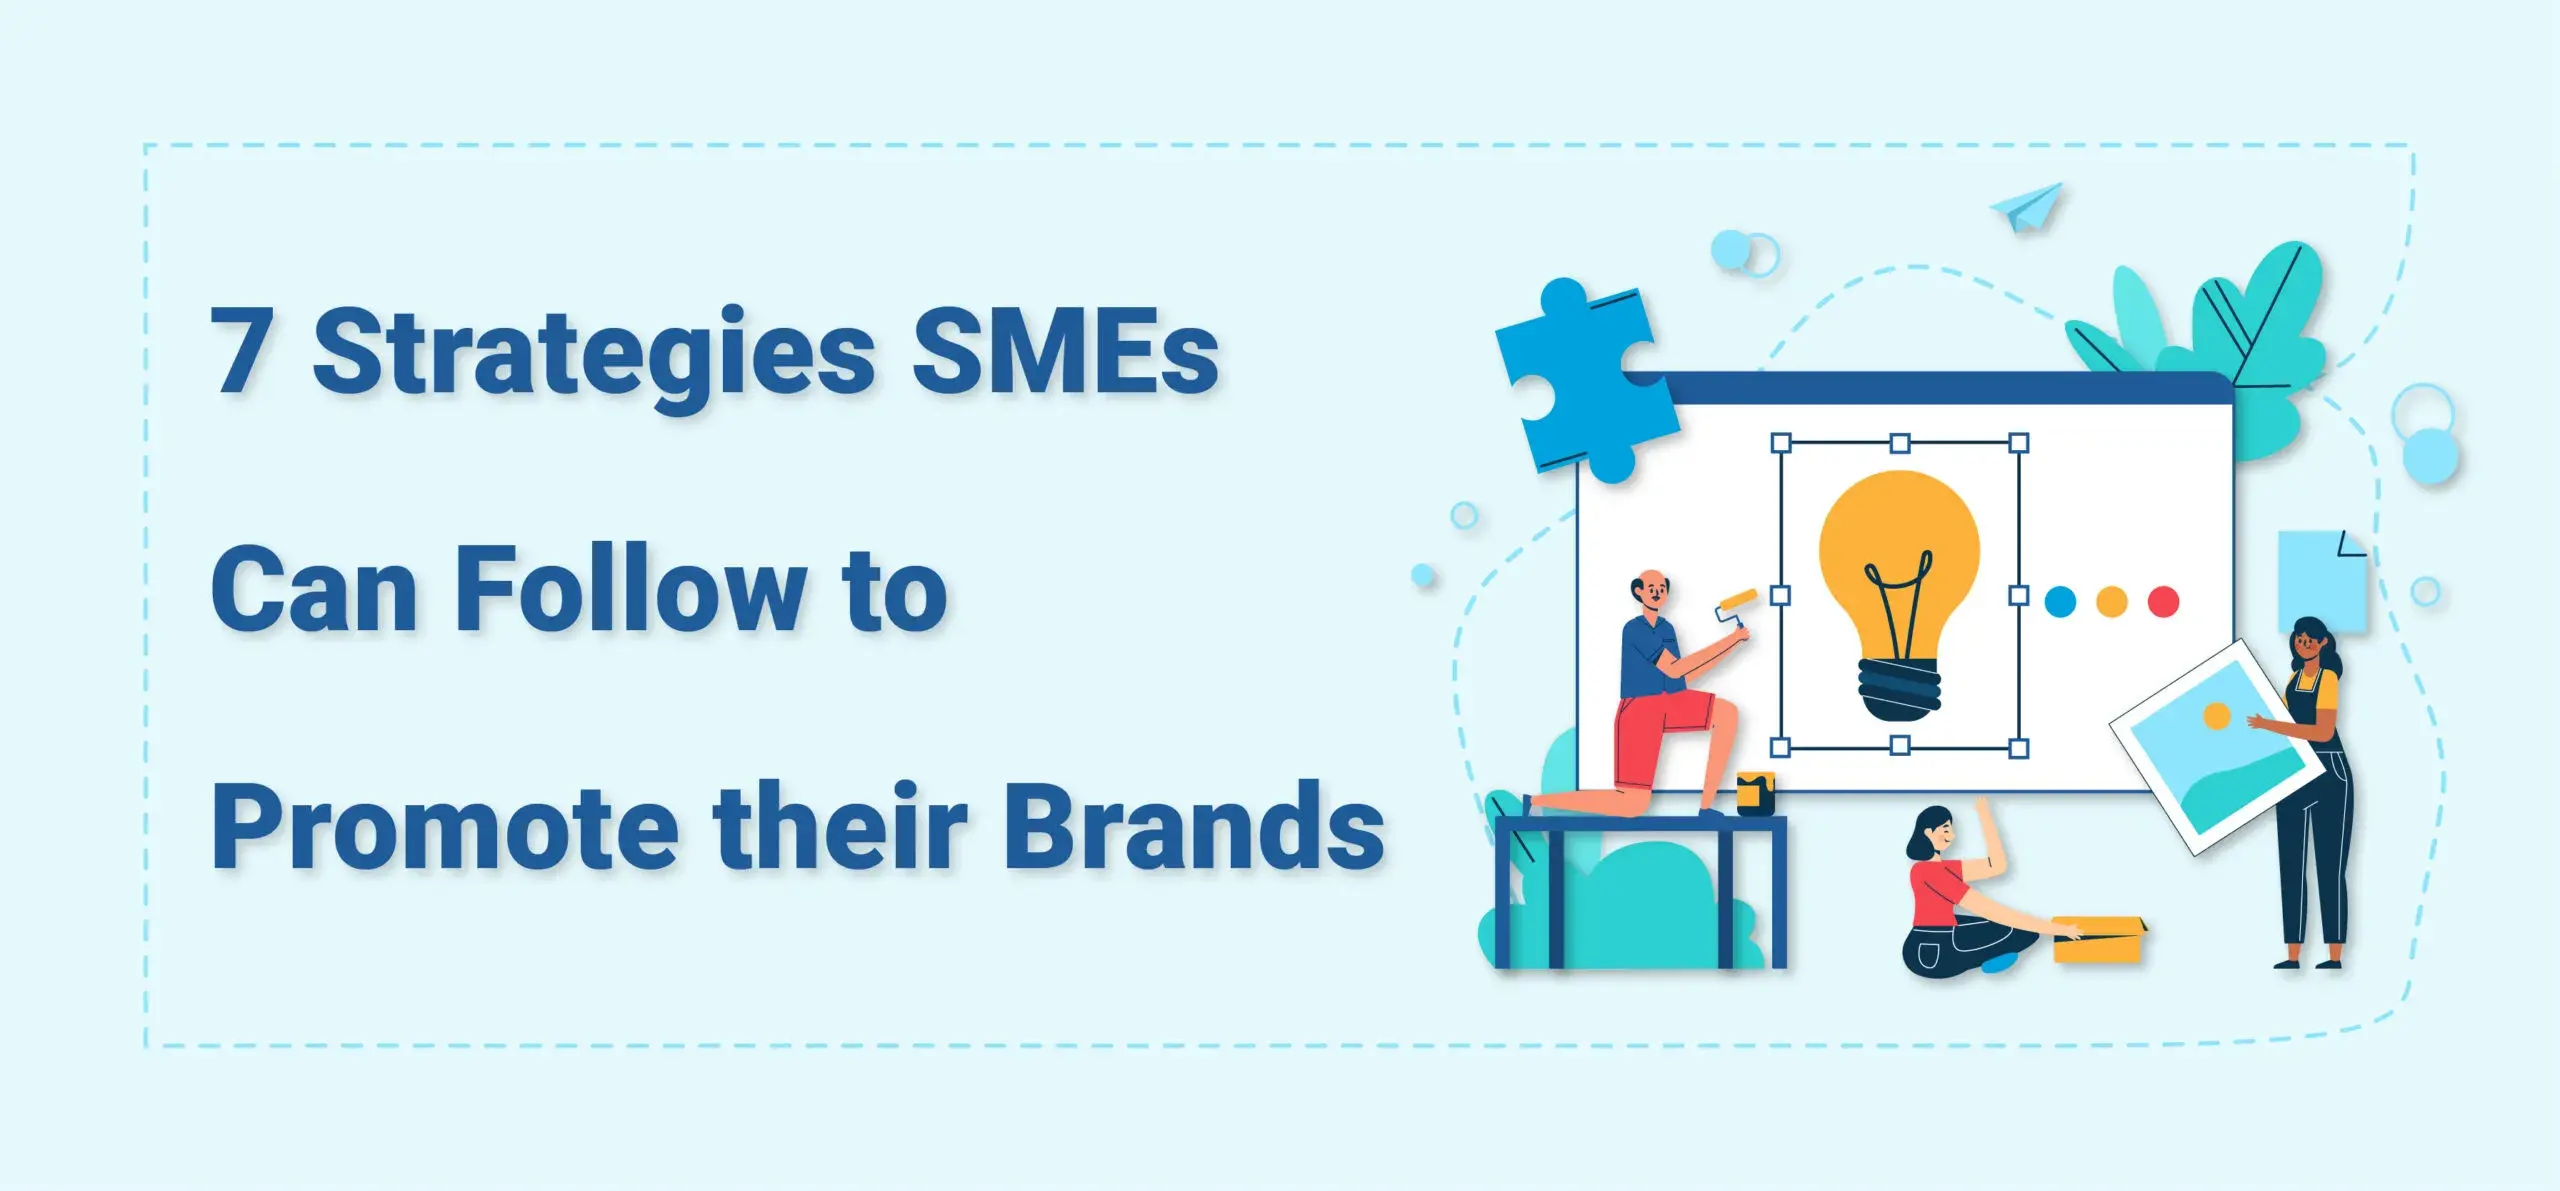 7 Strategies SMEs Can Follow to Promote Their Brands